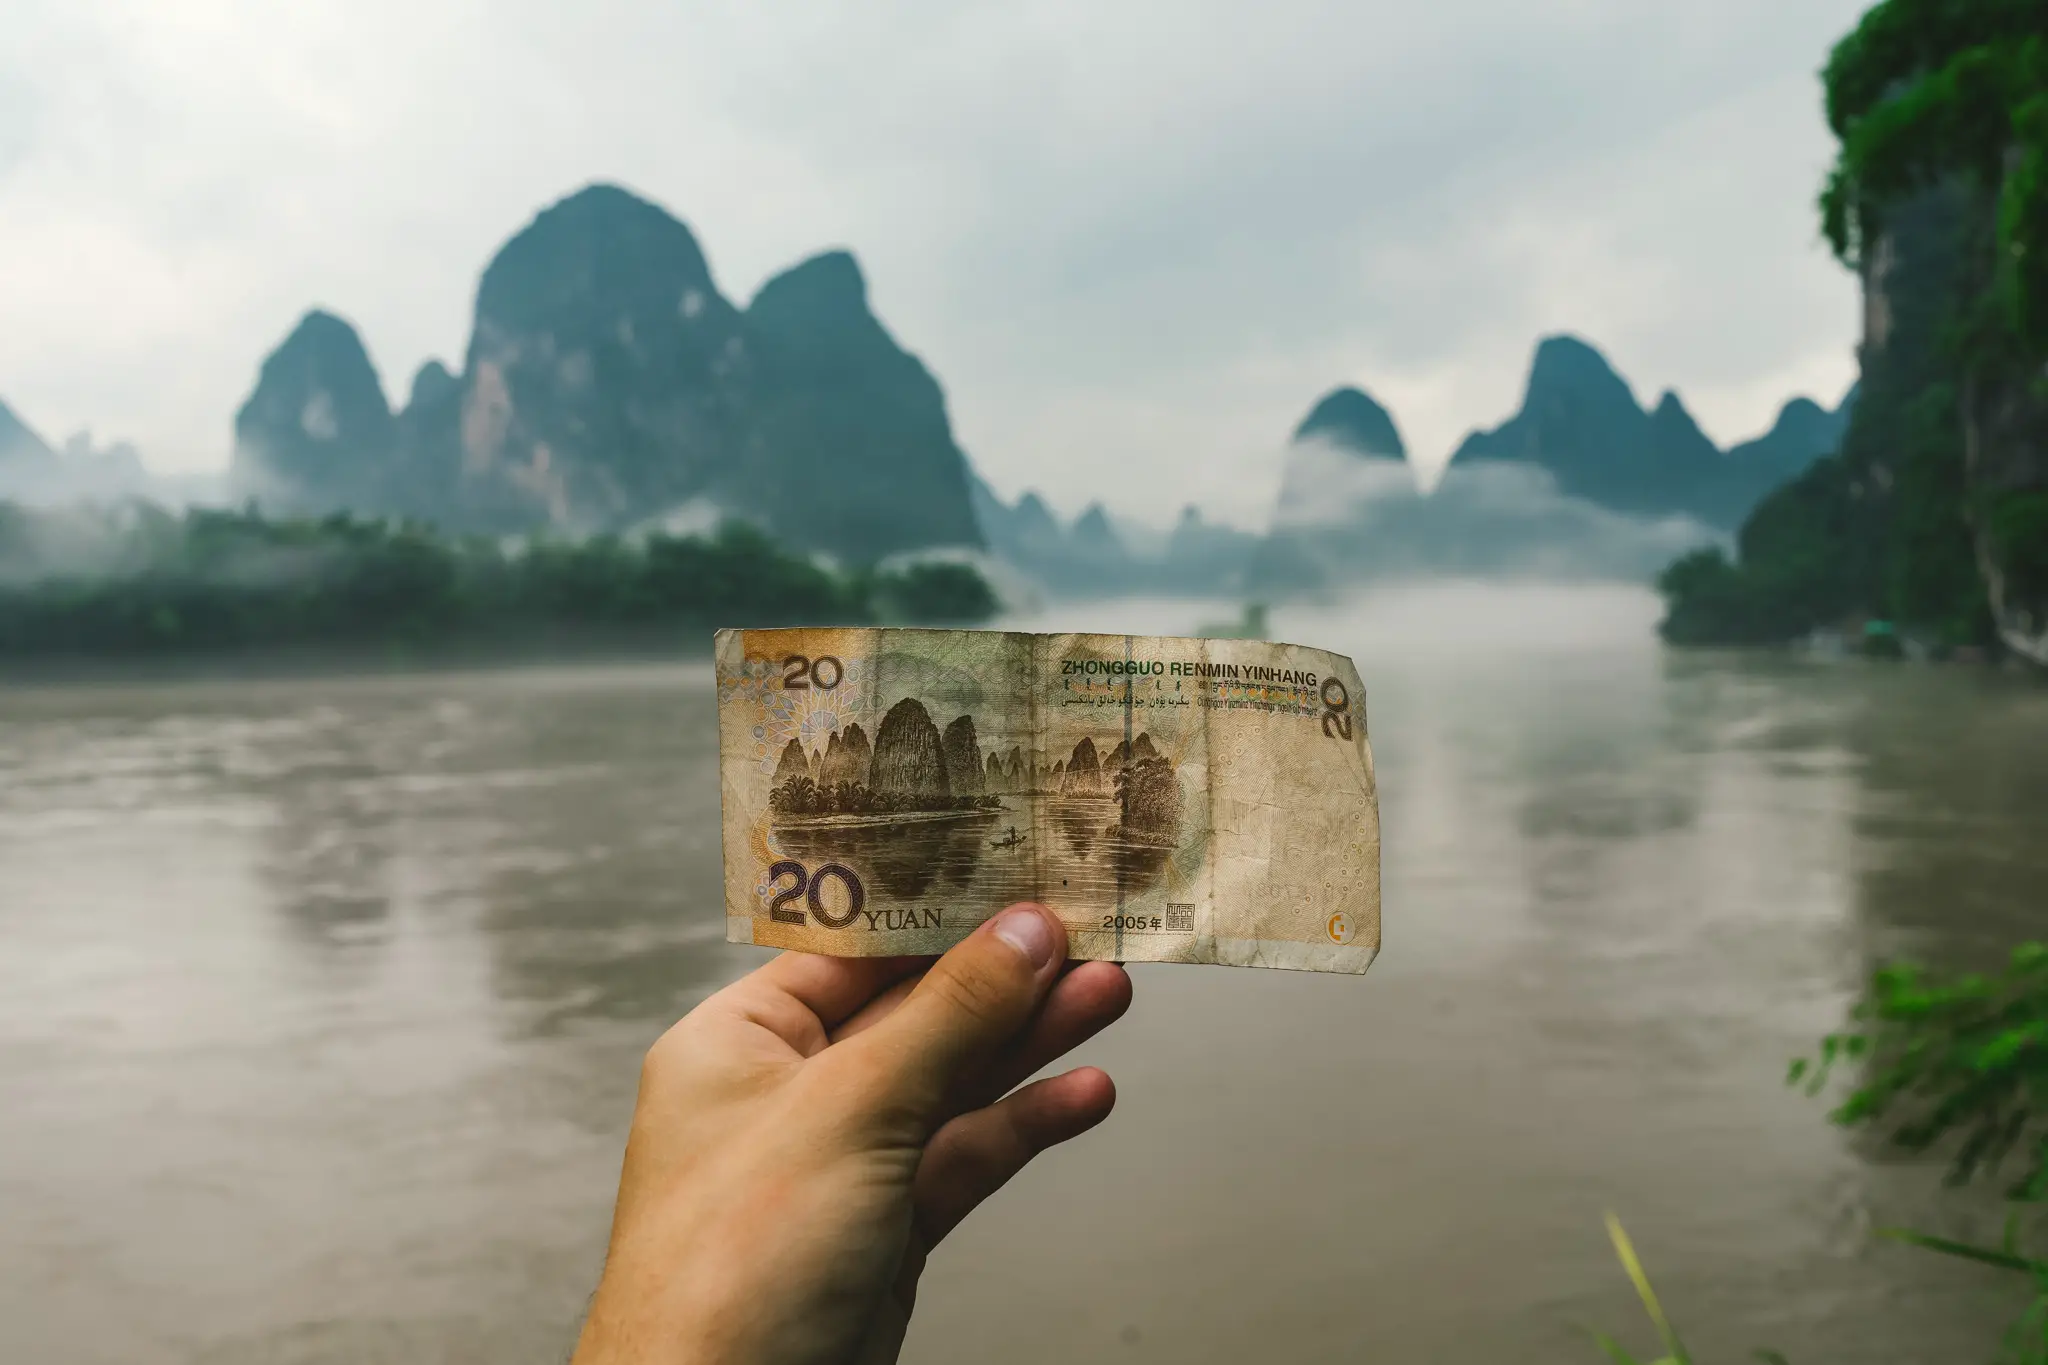 The image on the ¥20 bill is from Yangshuo